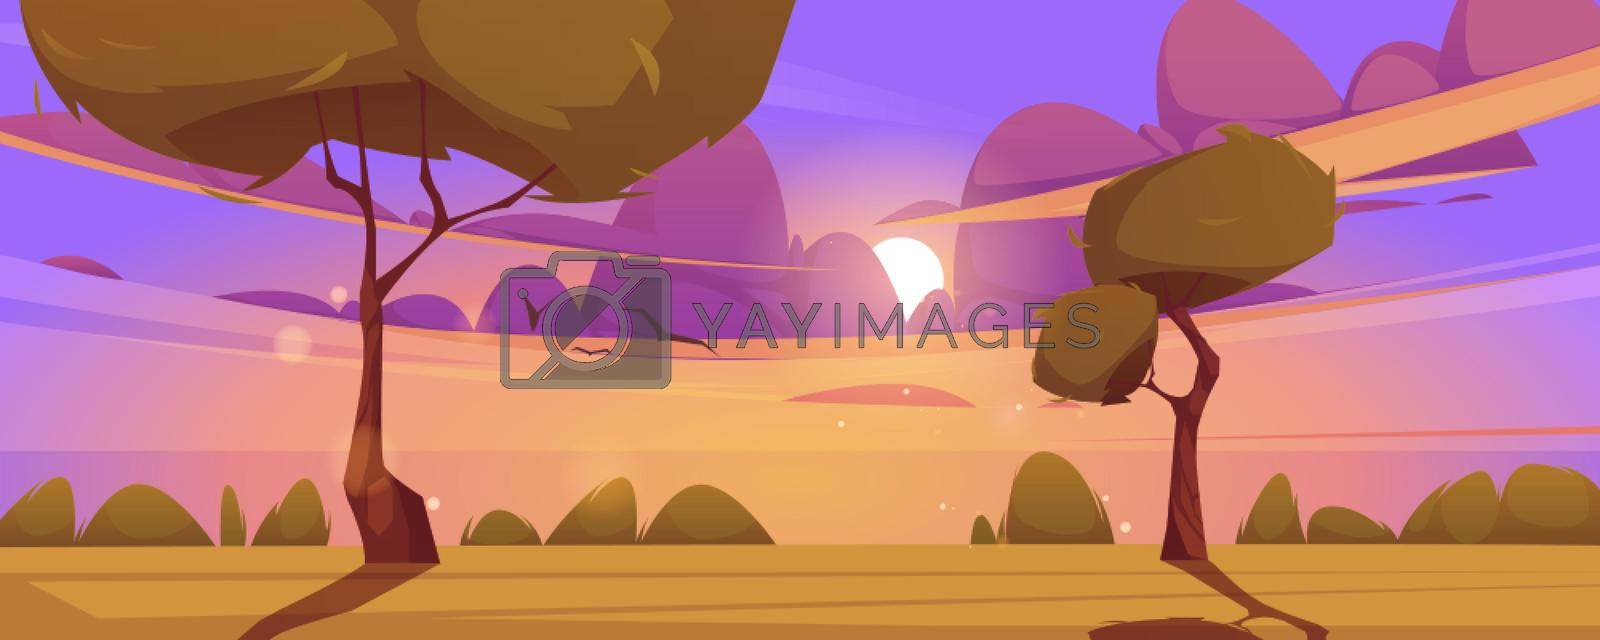 Cartoon dusk nature landscape green field with grass and trees under sky with sun at purple fluffy clouds with flying birds, picturesque sunset scenery background, tranquil scene, Vector illustration